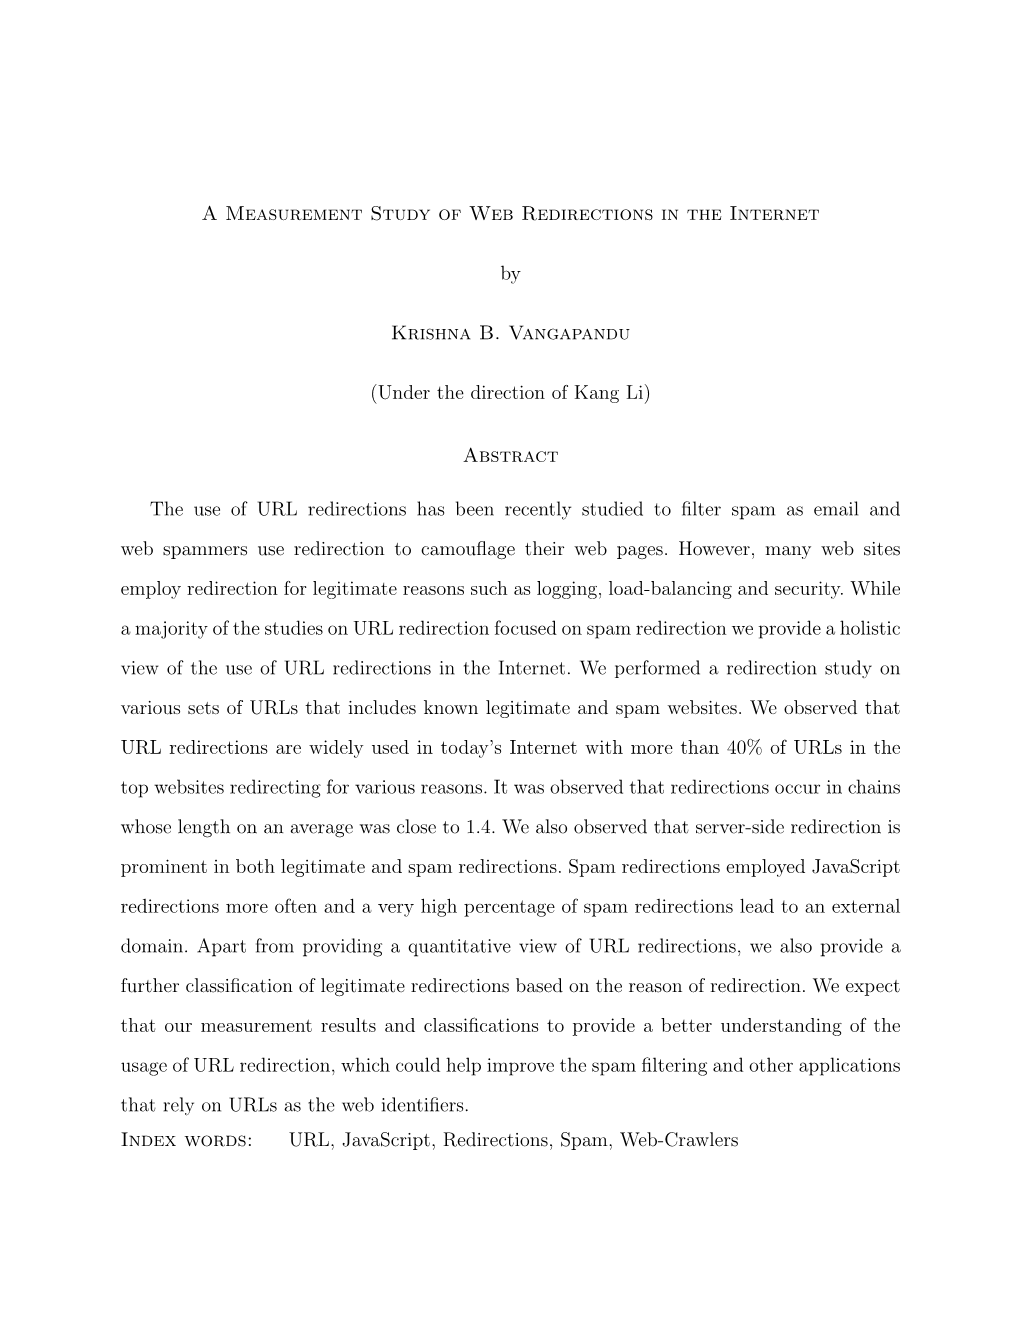 A Measurement Study of Web Redirections in the Internet By